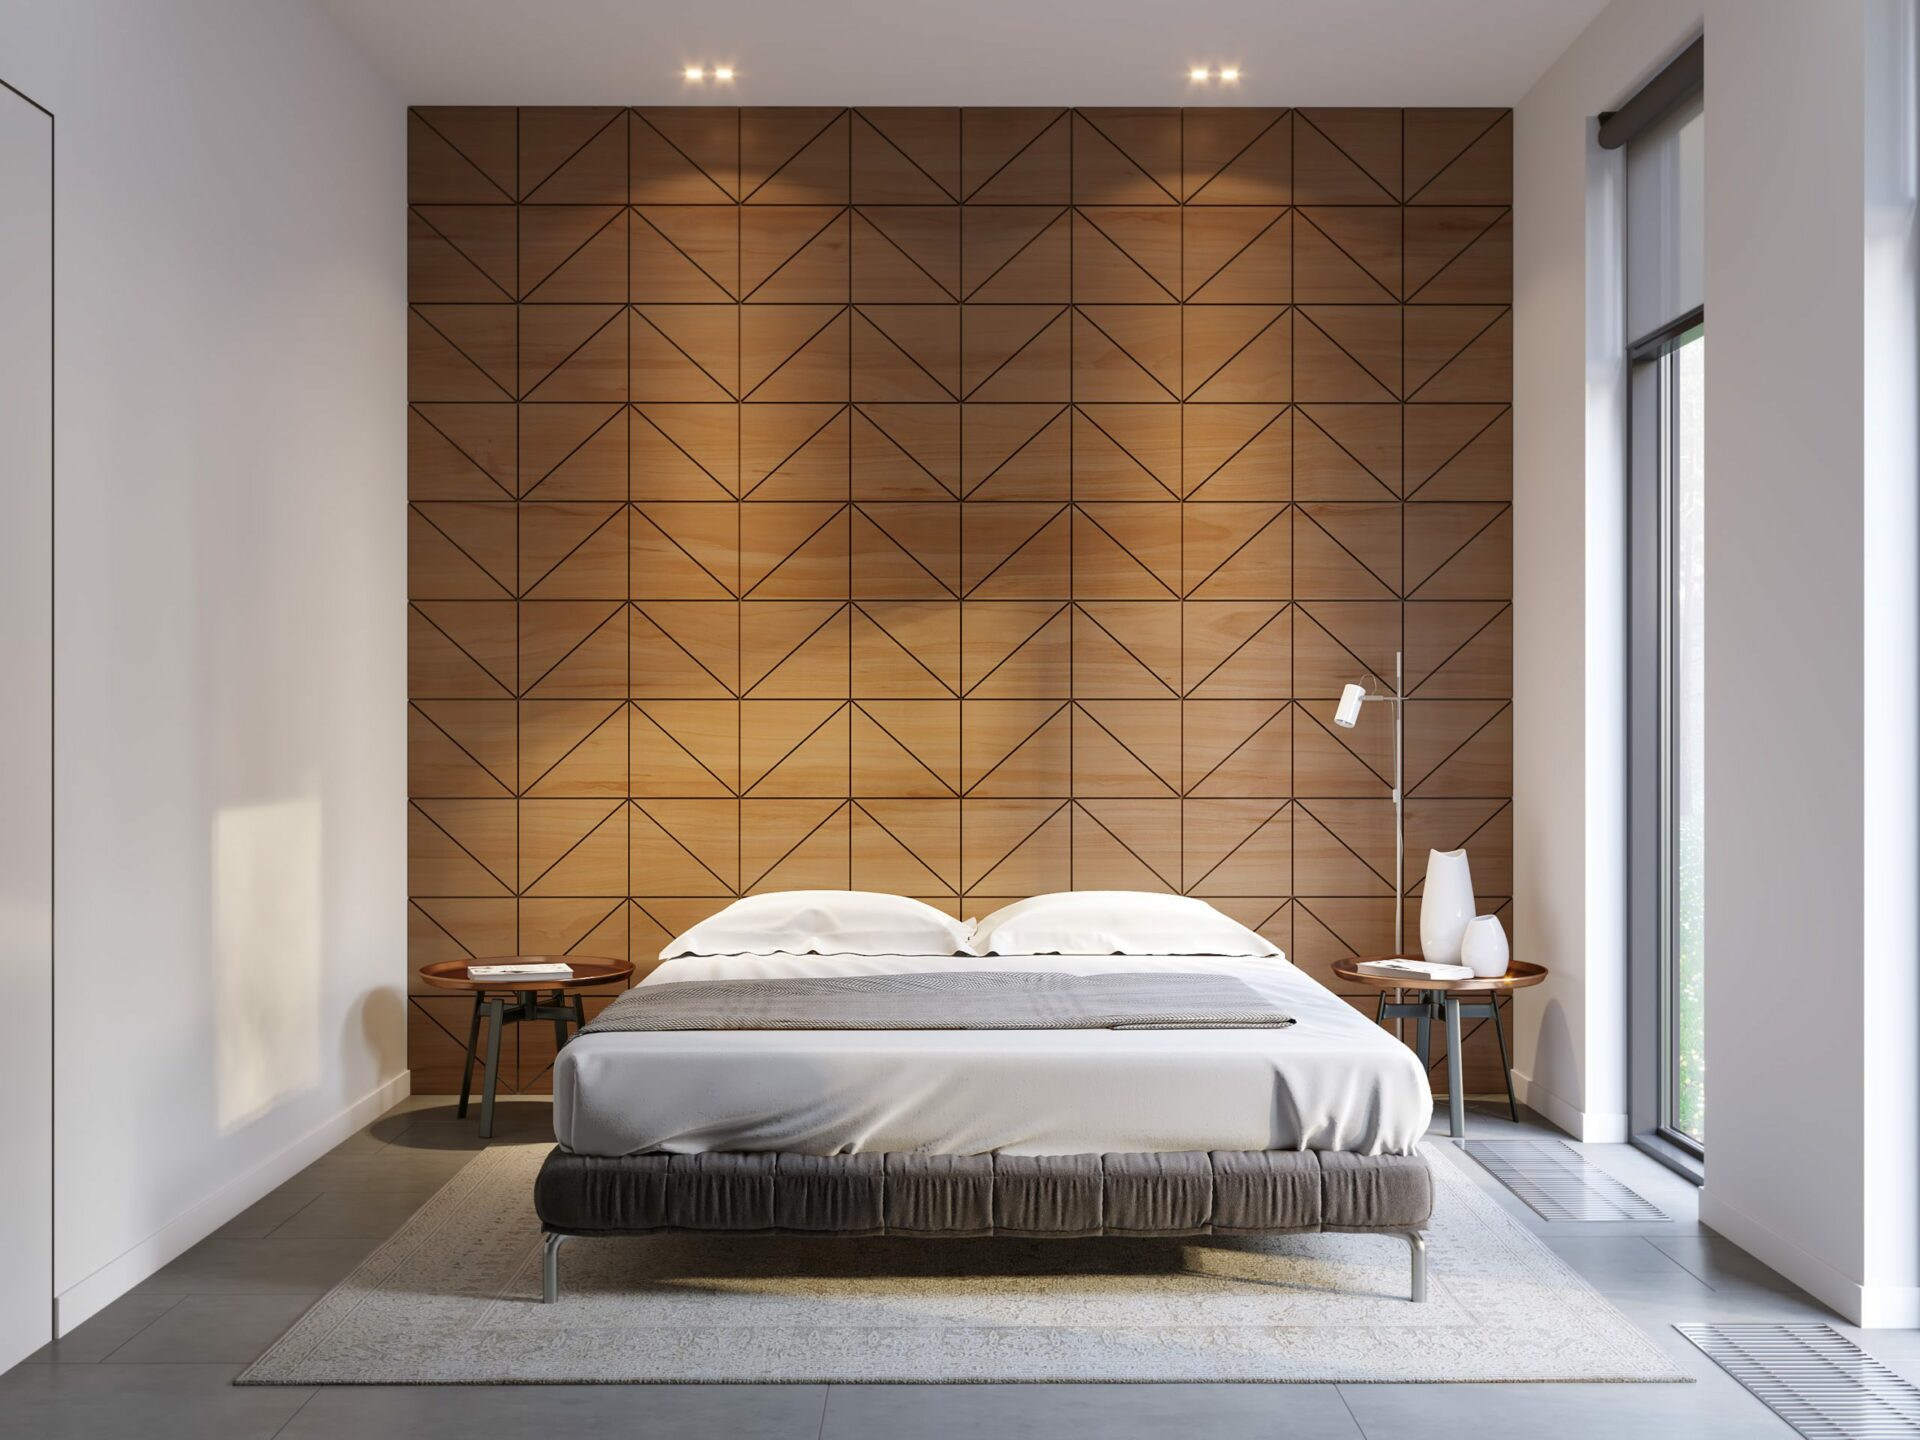 Example of Urban Contemporary Modern Minimalism Bedroom Interior Design With Modern Bed and Wooden Paneling on Wall. From Graham's Fort Collins Flooring & Design.